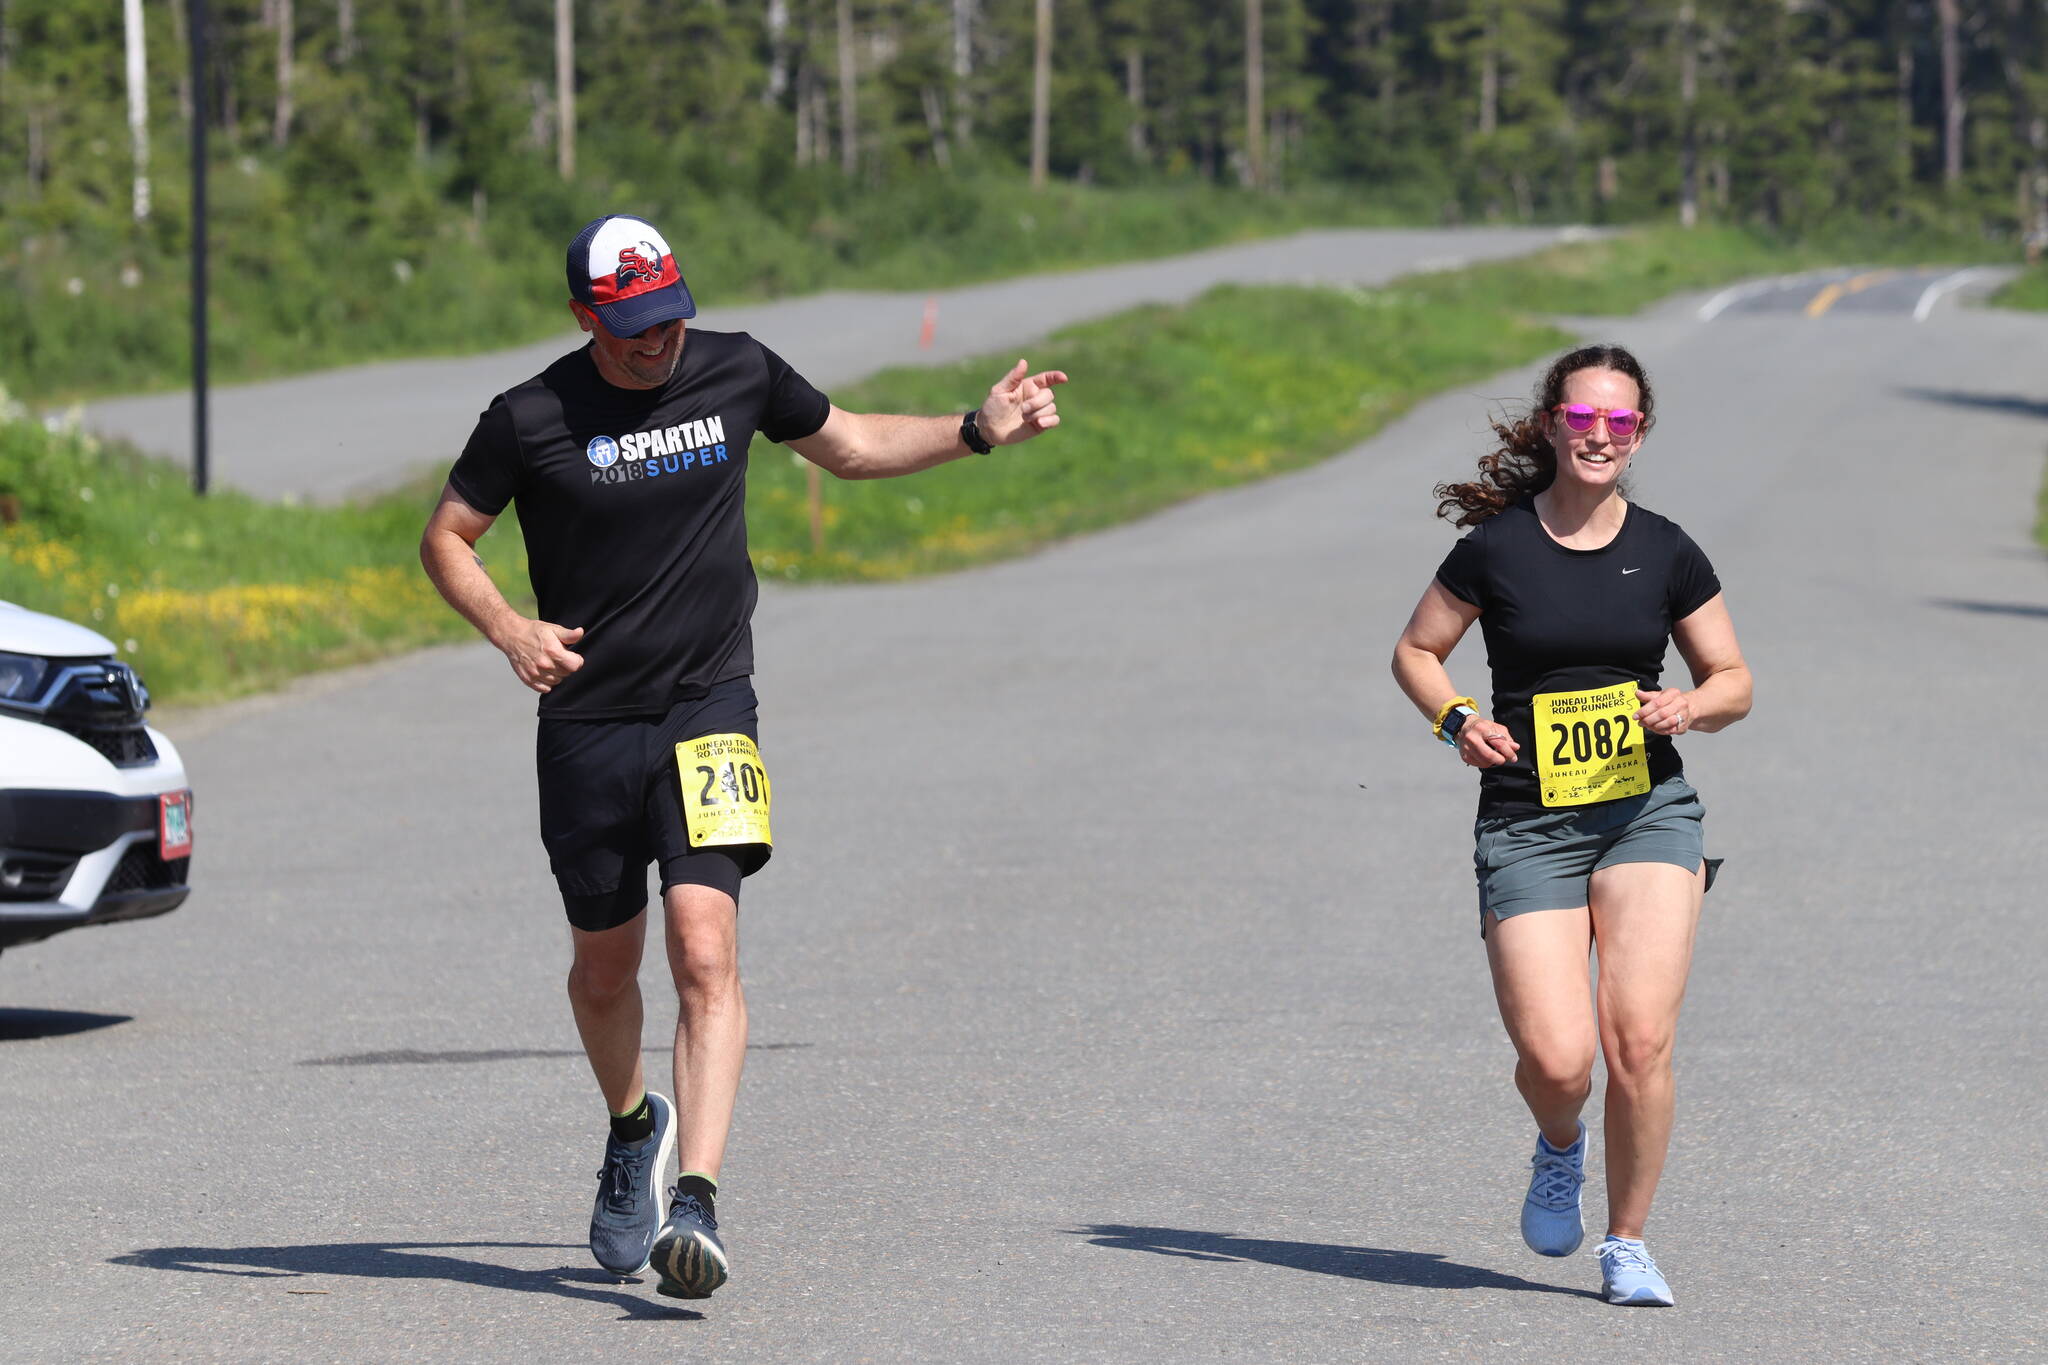 Addison Field, left, cheers for Geneva Peters as she sprints in to the finish during the Eaglecrest Road and Ridge Race on July 2, 2022. (Michael S. Lockett / Juneau Empire)